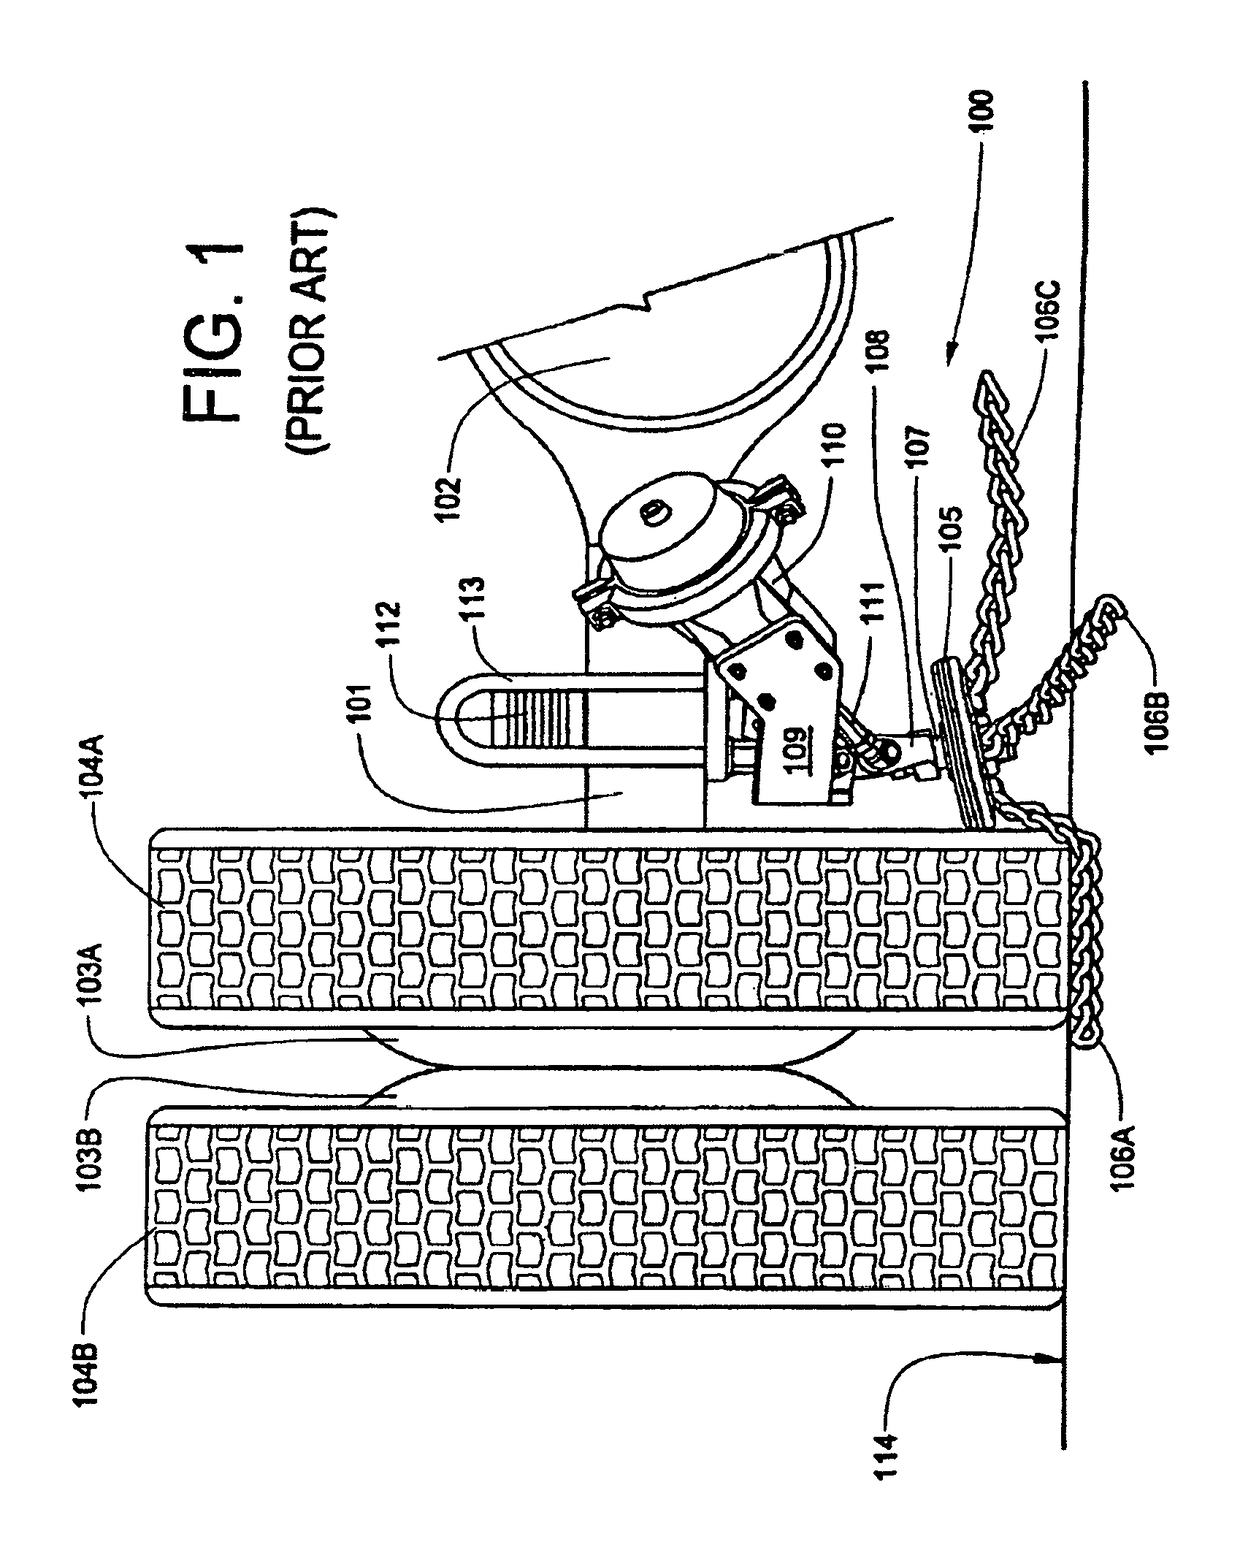 Pneumatically-operated rigid linear chain and sprocket actuator for deploying a vehicle snow chain traction system